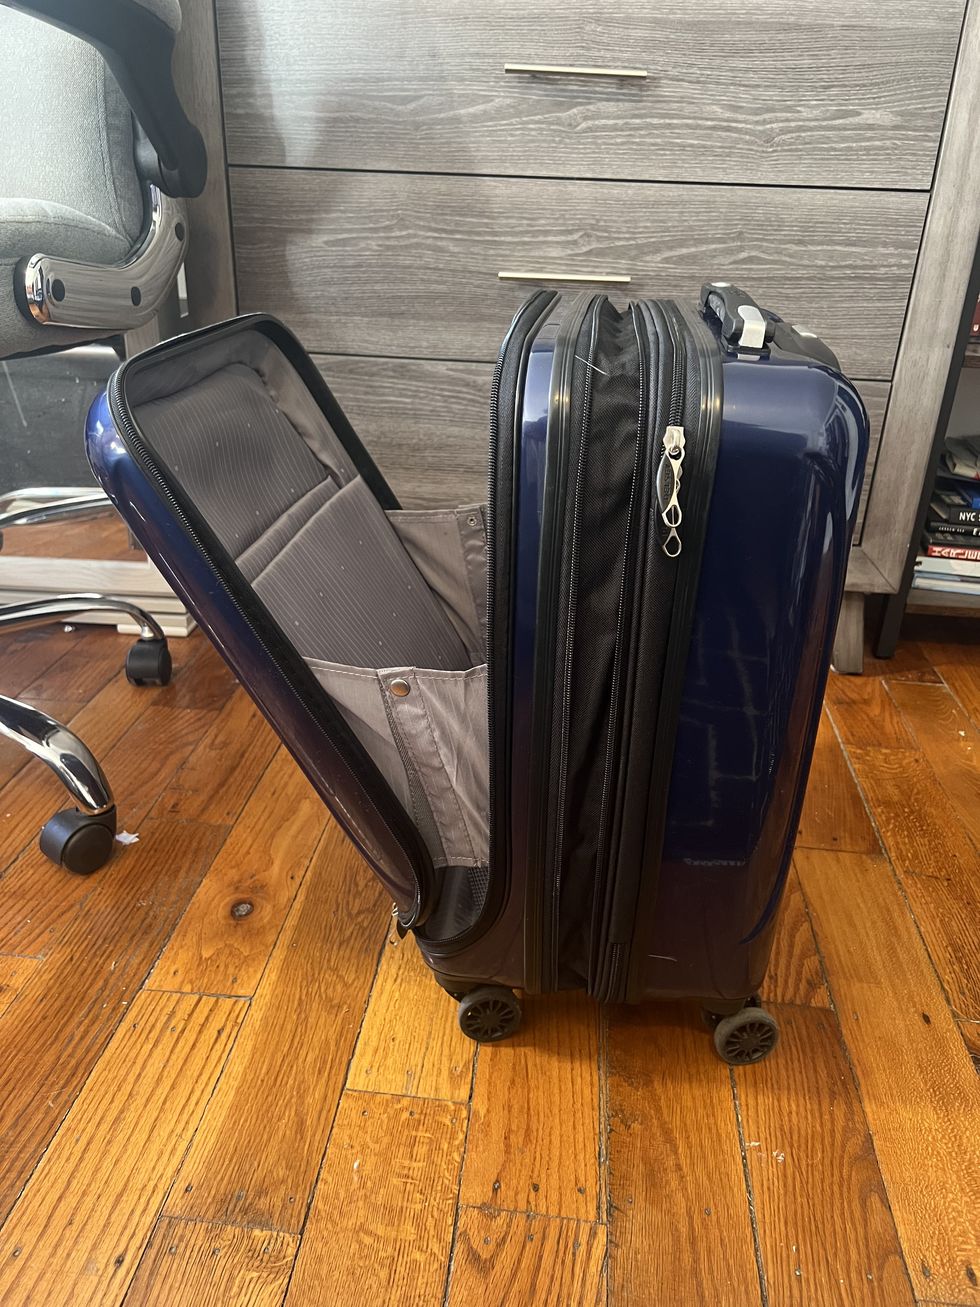 a couple of suitcases sit on a wood floor